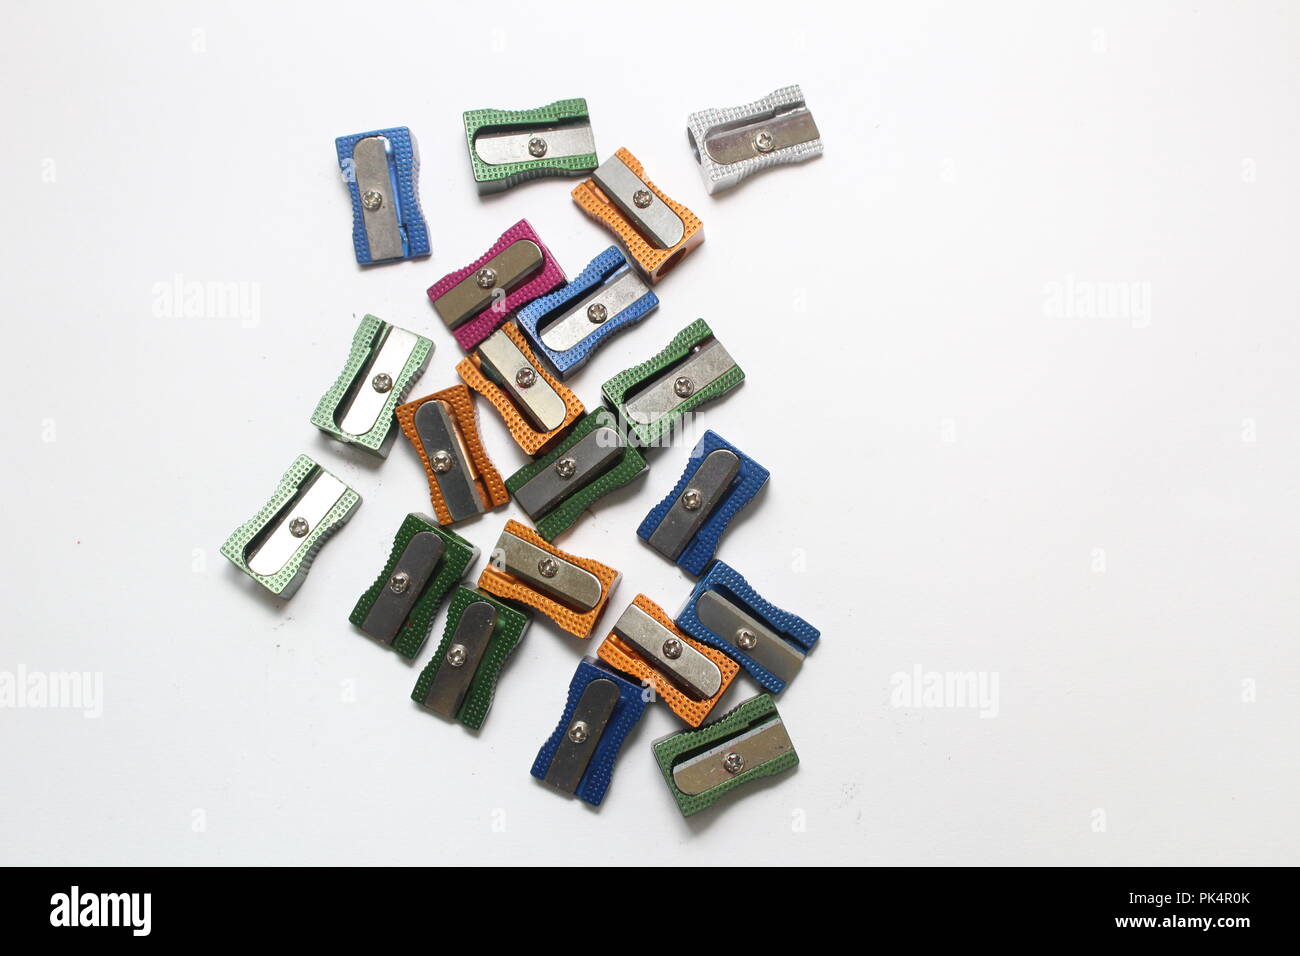 Multi coloured metal pencil sharpeners on plain background, a still life study Stock Photo